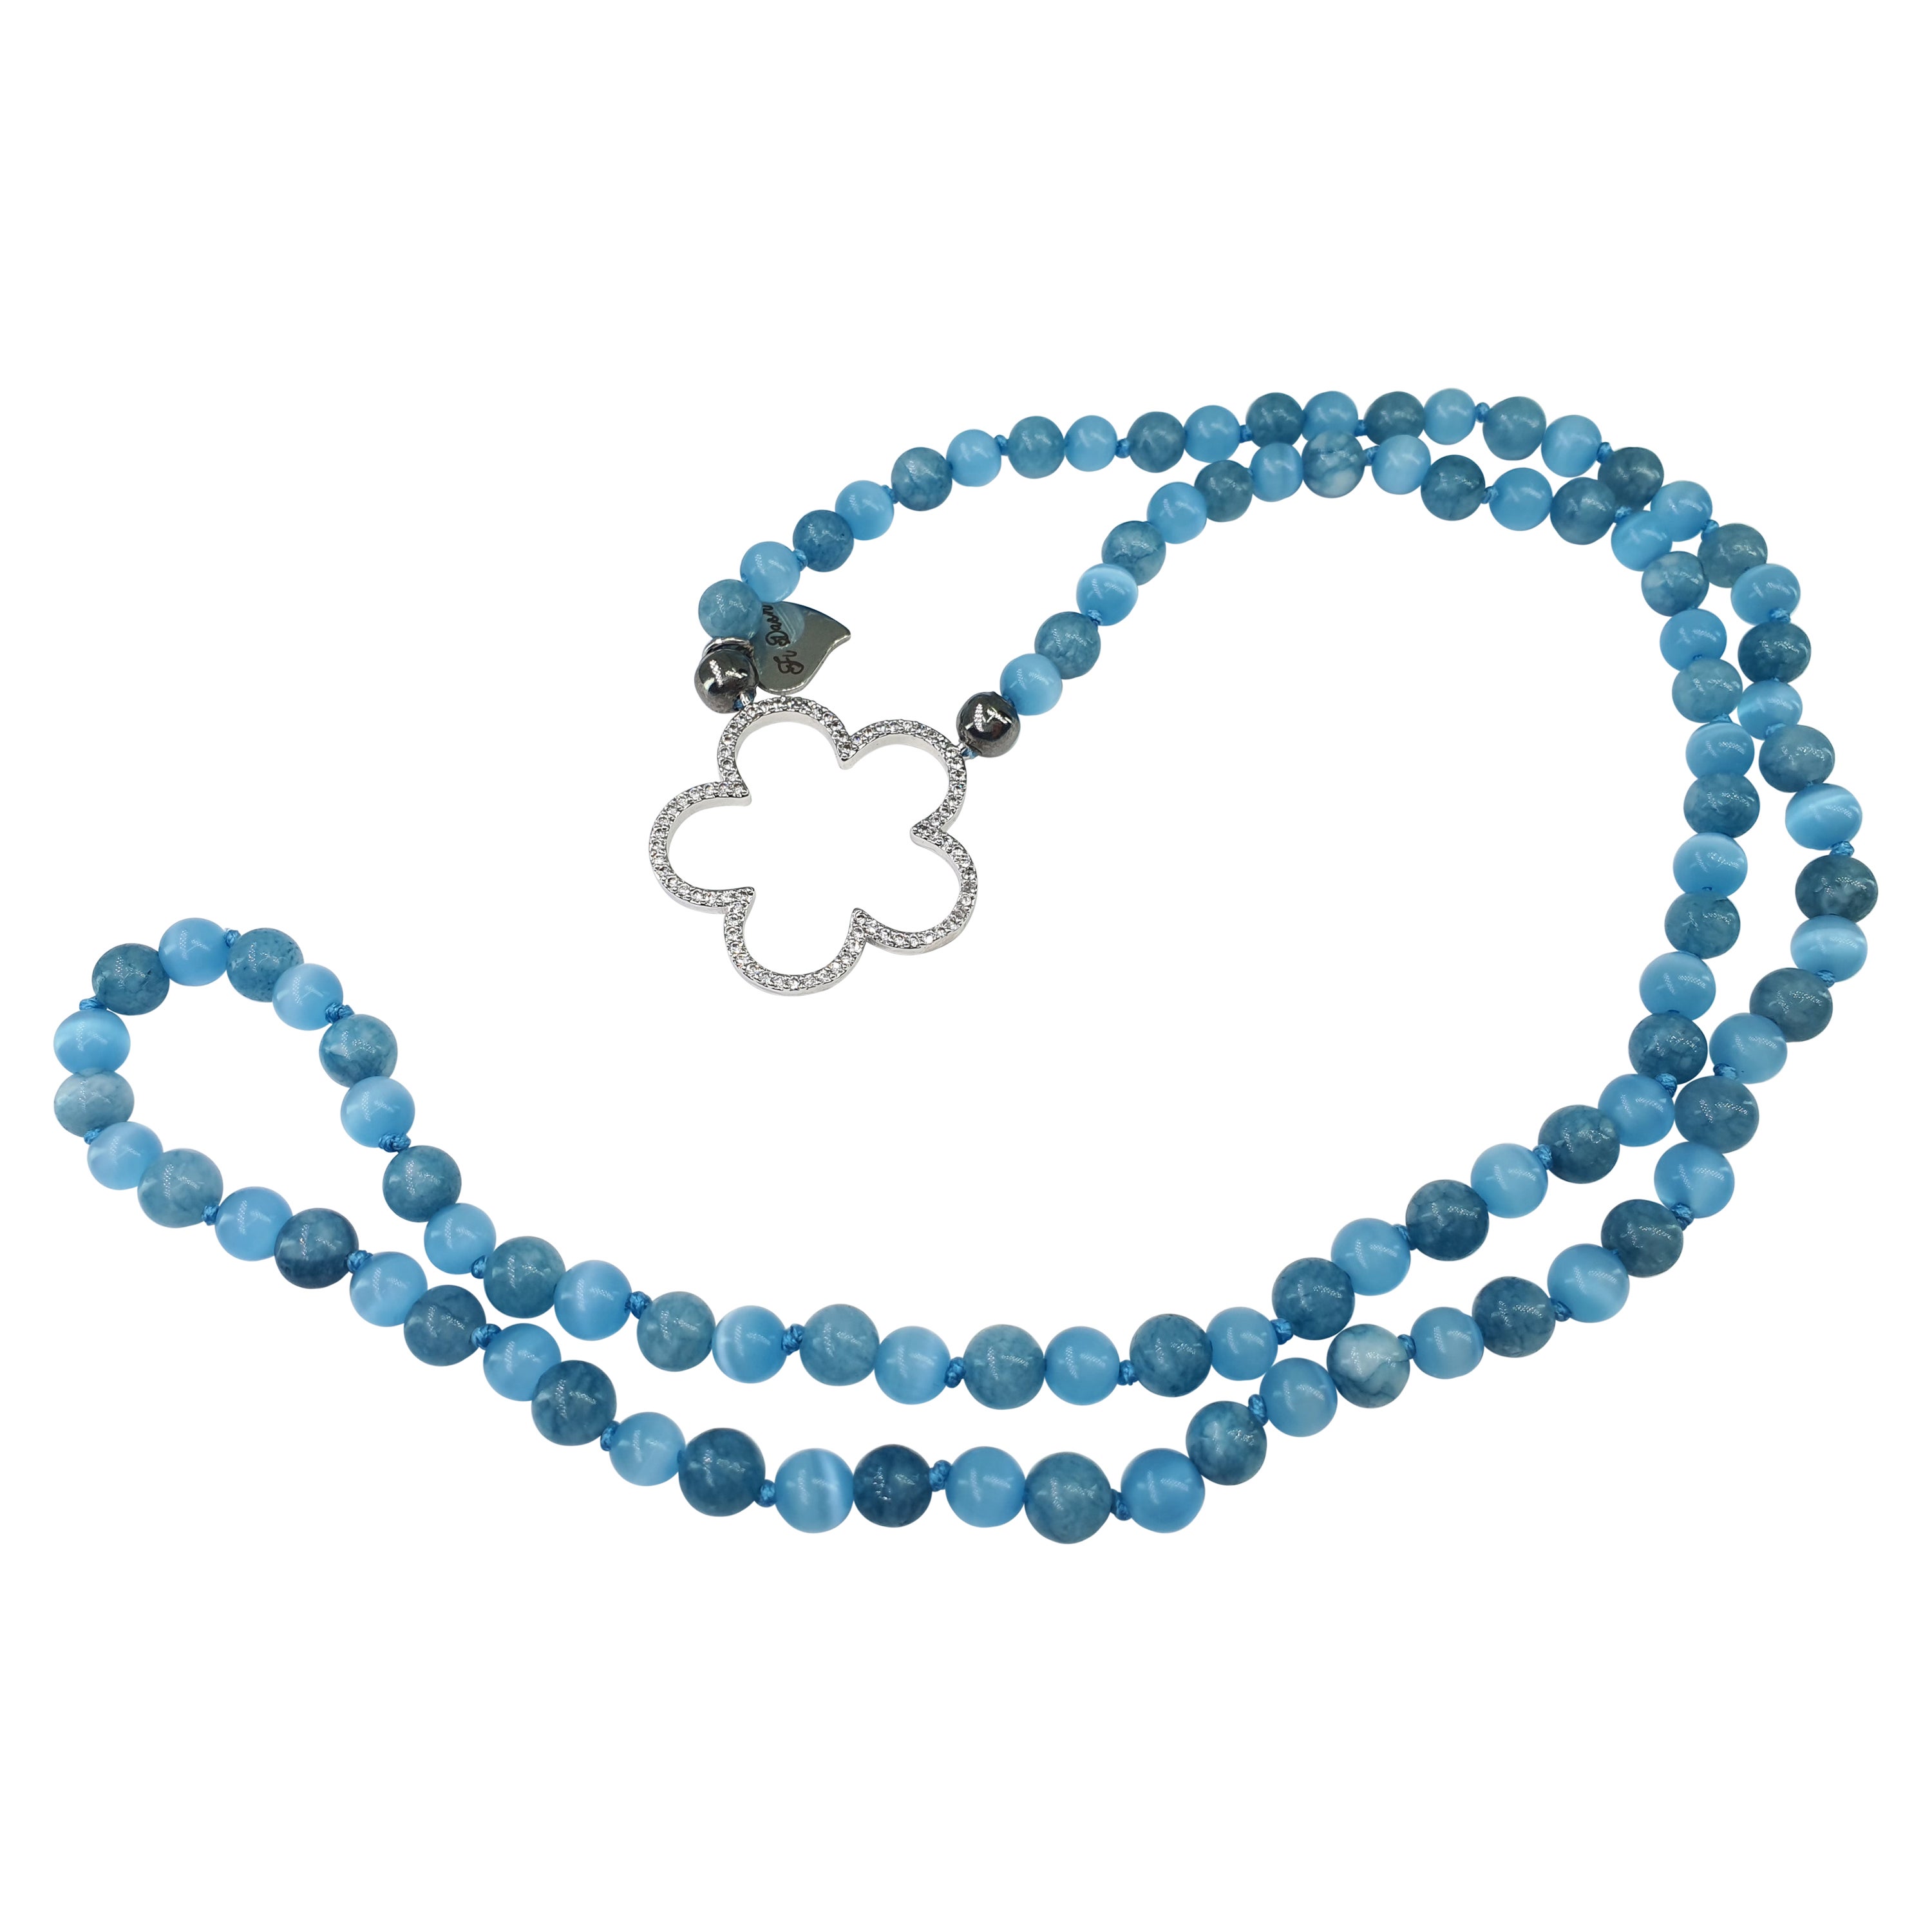 Aquamarine Light Cat Eye Beads Sunglasses Necklace with Flower For Sale